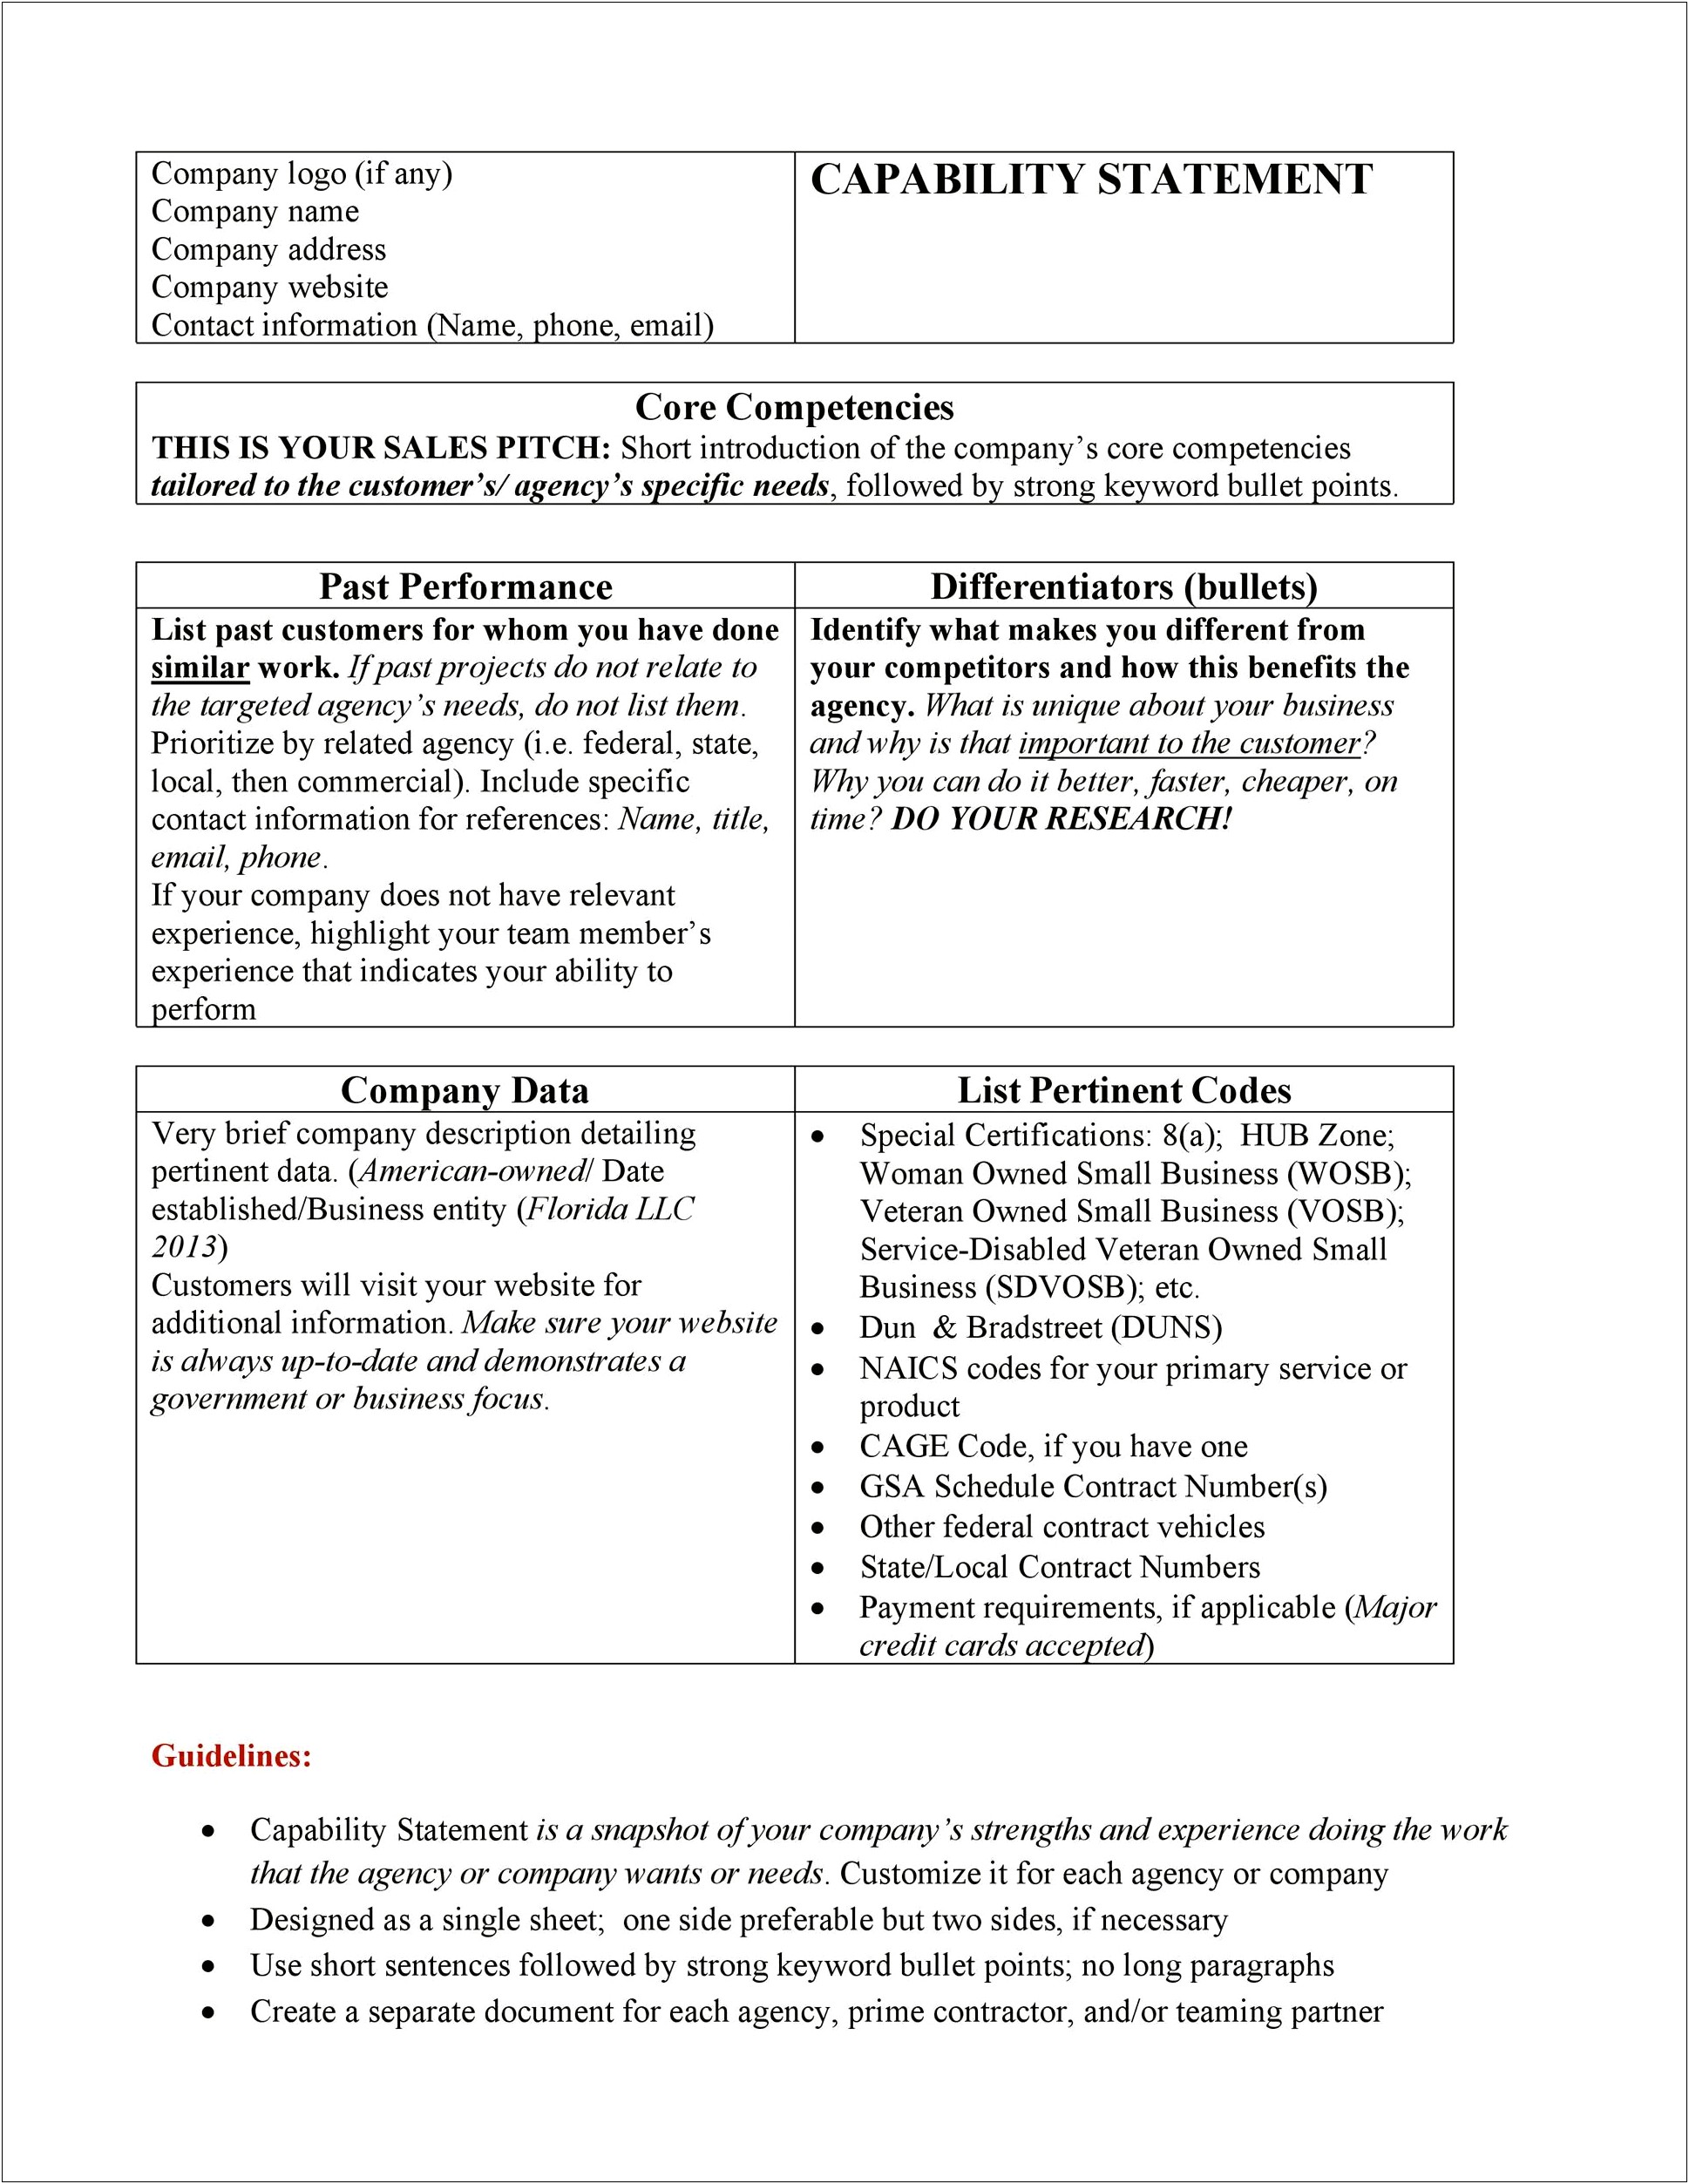 Free Capability Statement Template Word Document